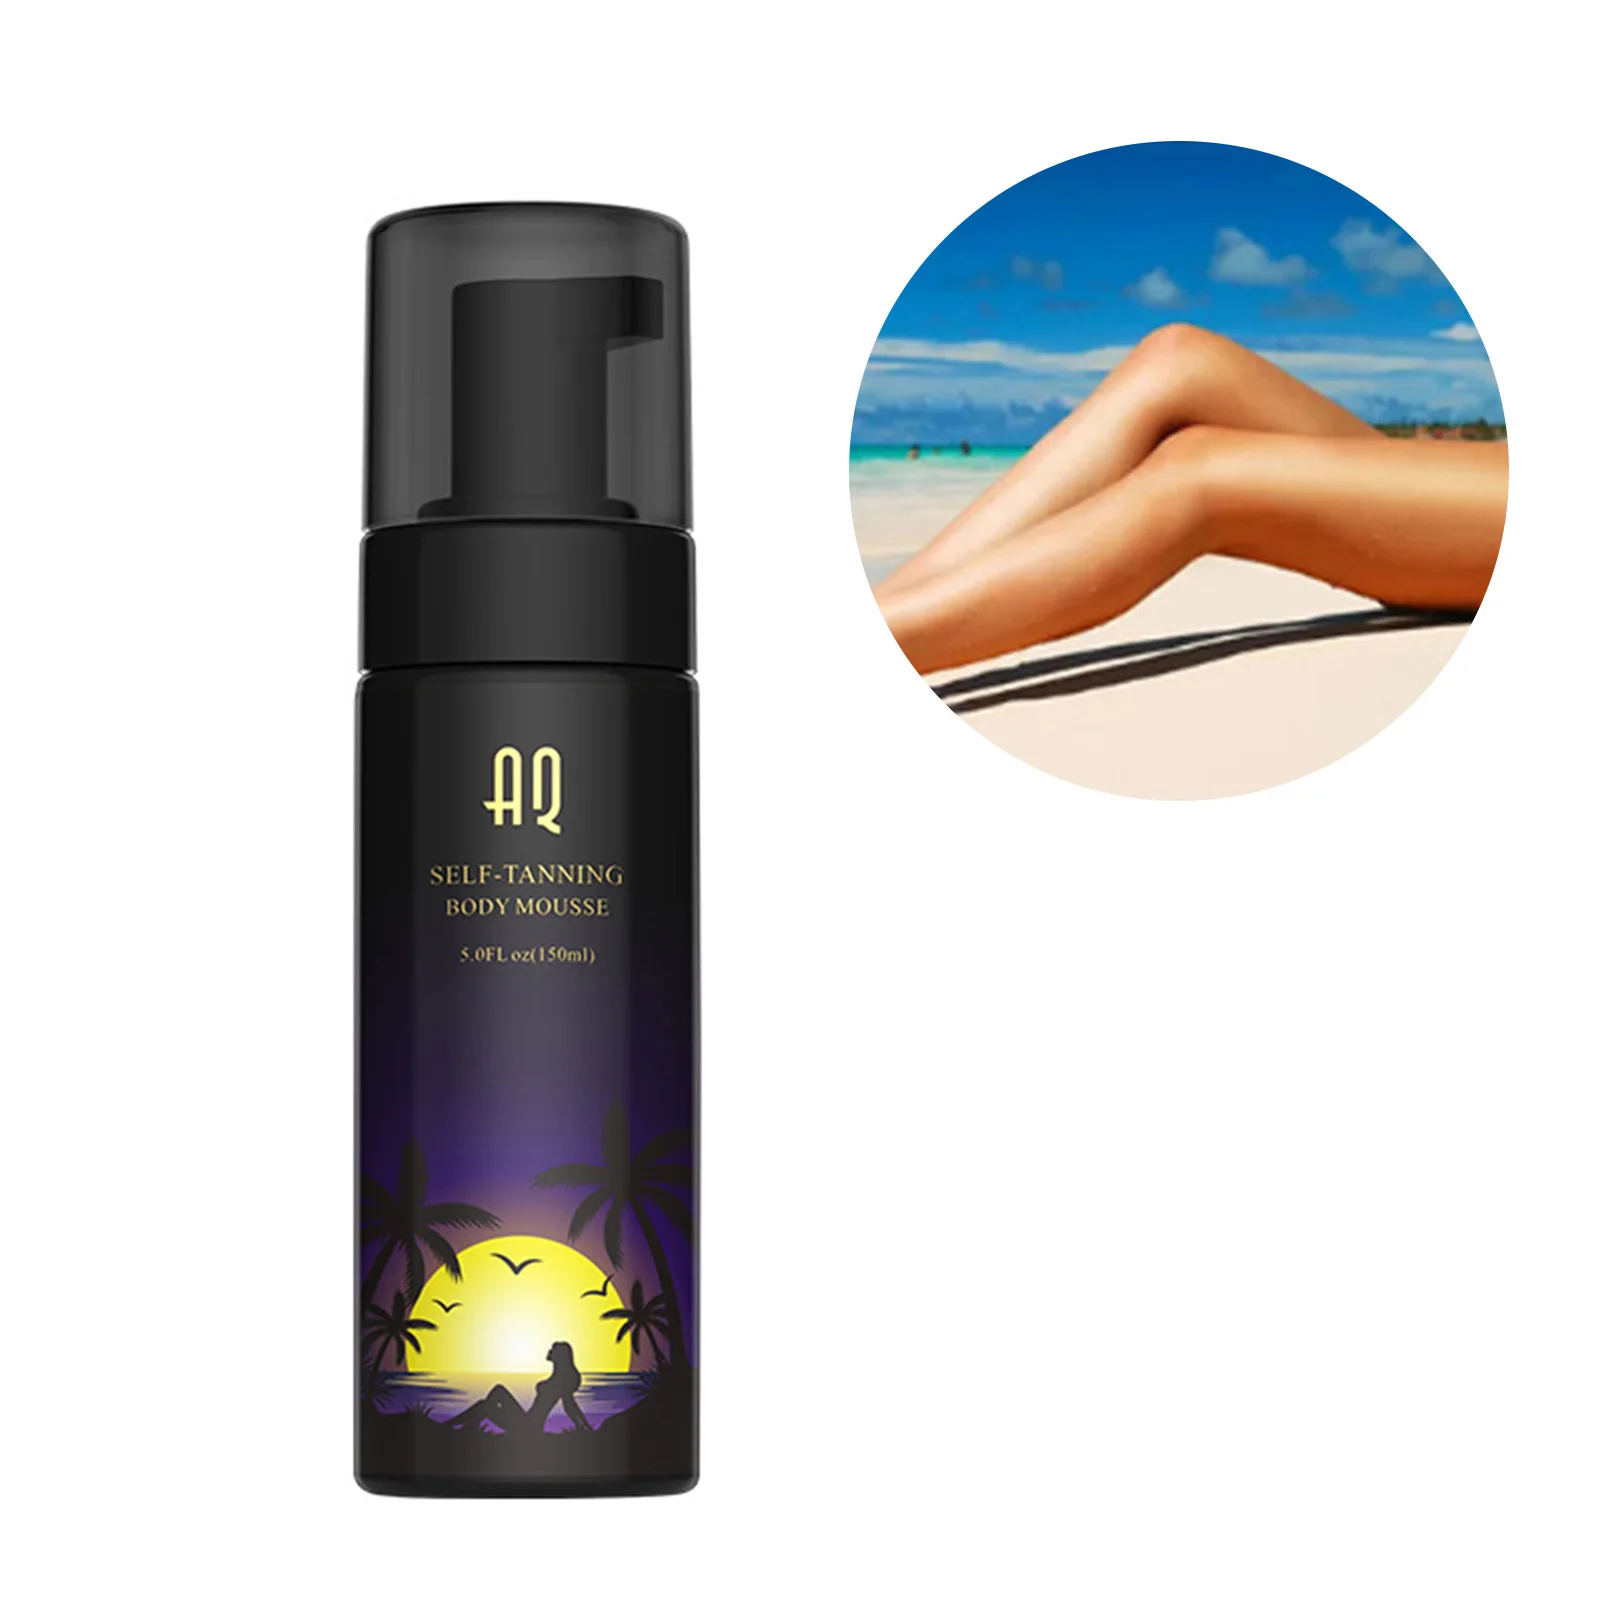 

Tanning Mouse Instant Fake Tan Mousse Self Tanning Express Tanner For Fast Tan For Getting Tan At Home With No Need Of Long Time